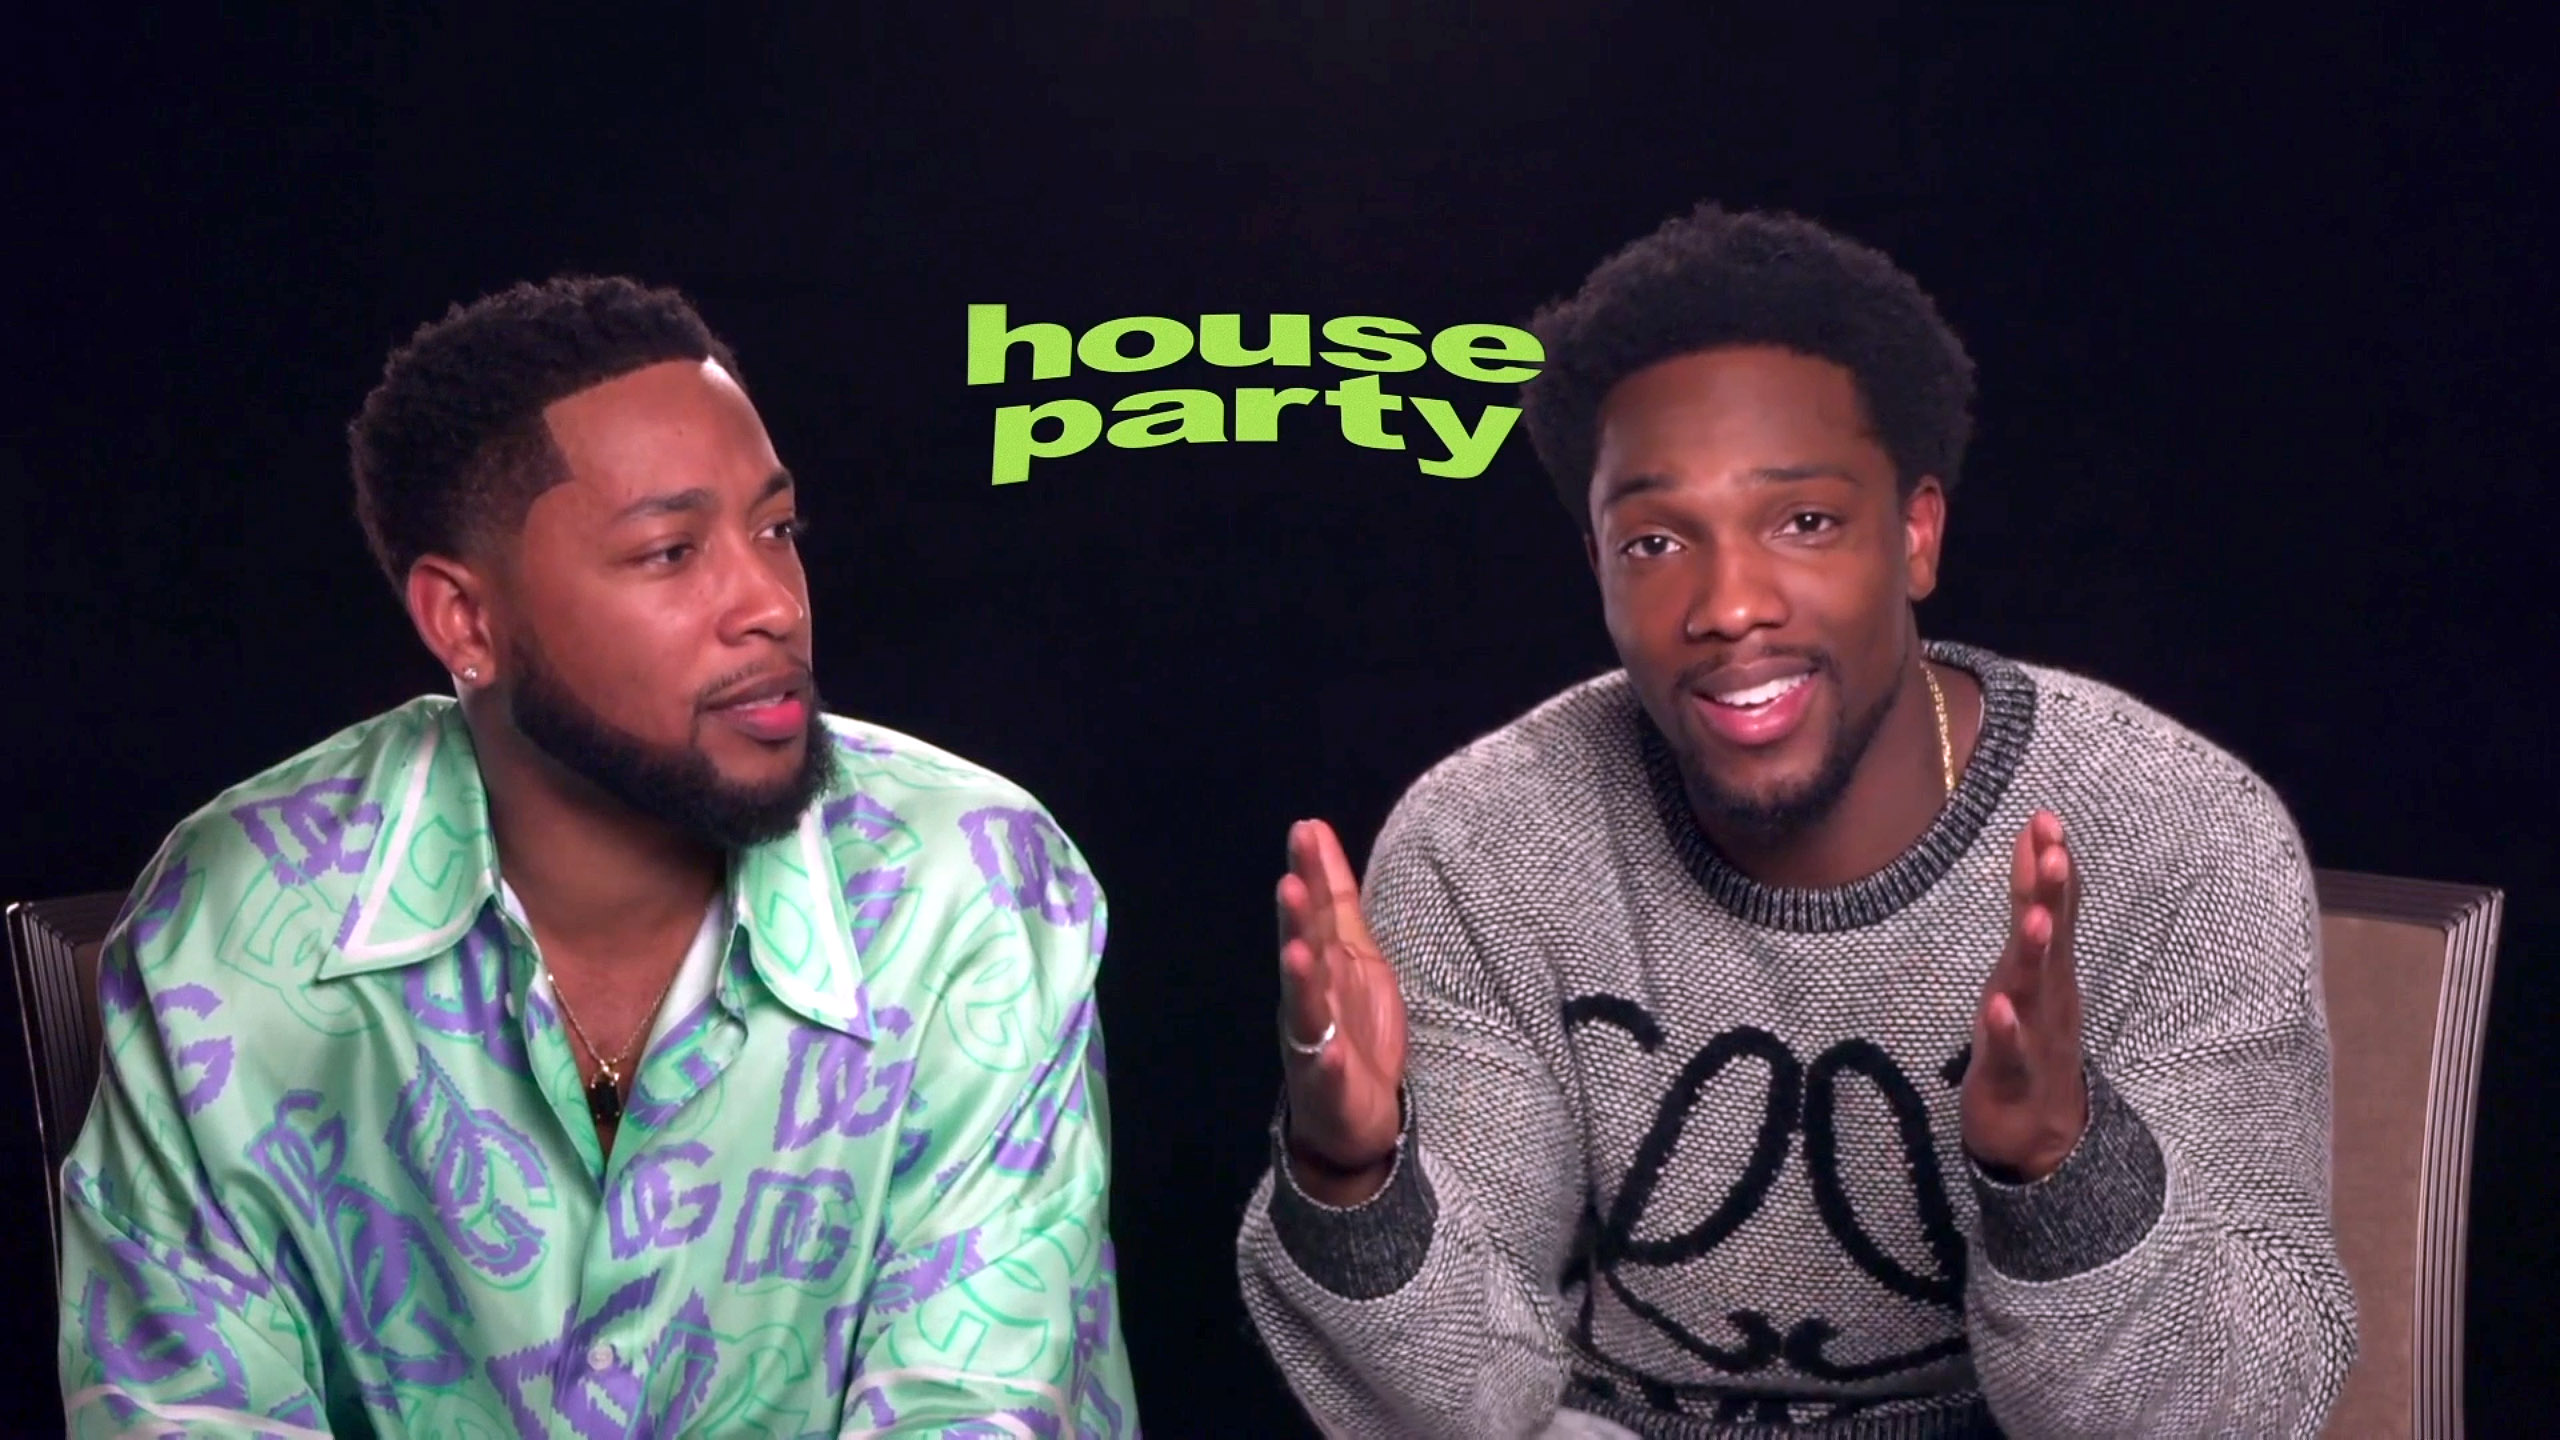 The “House Party” Crew Talks With MERRY JANE About Making the Movie With Snoop Dogg